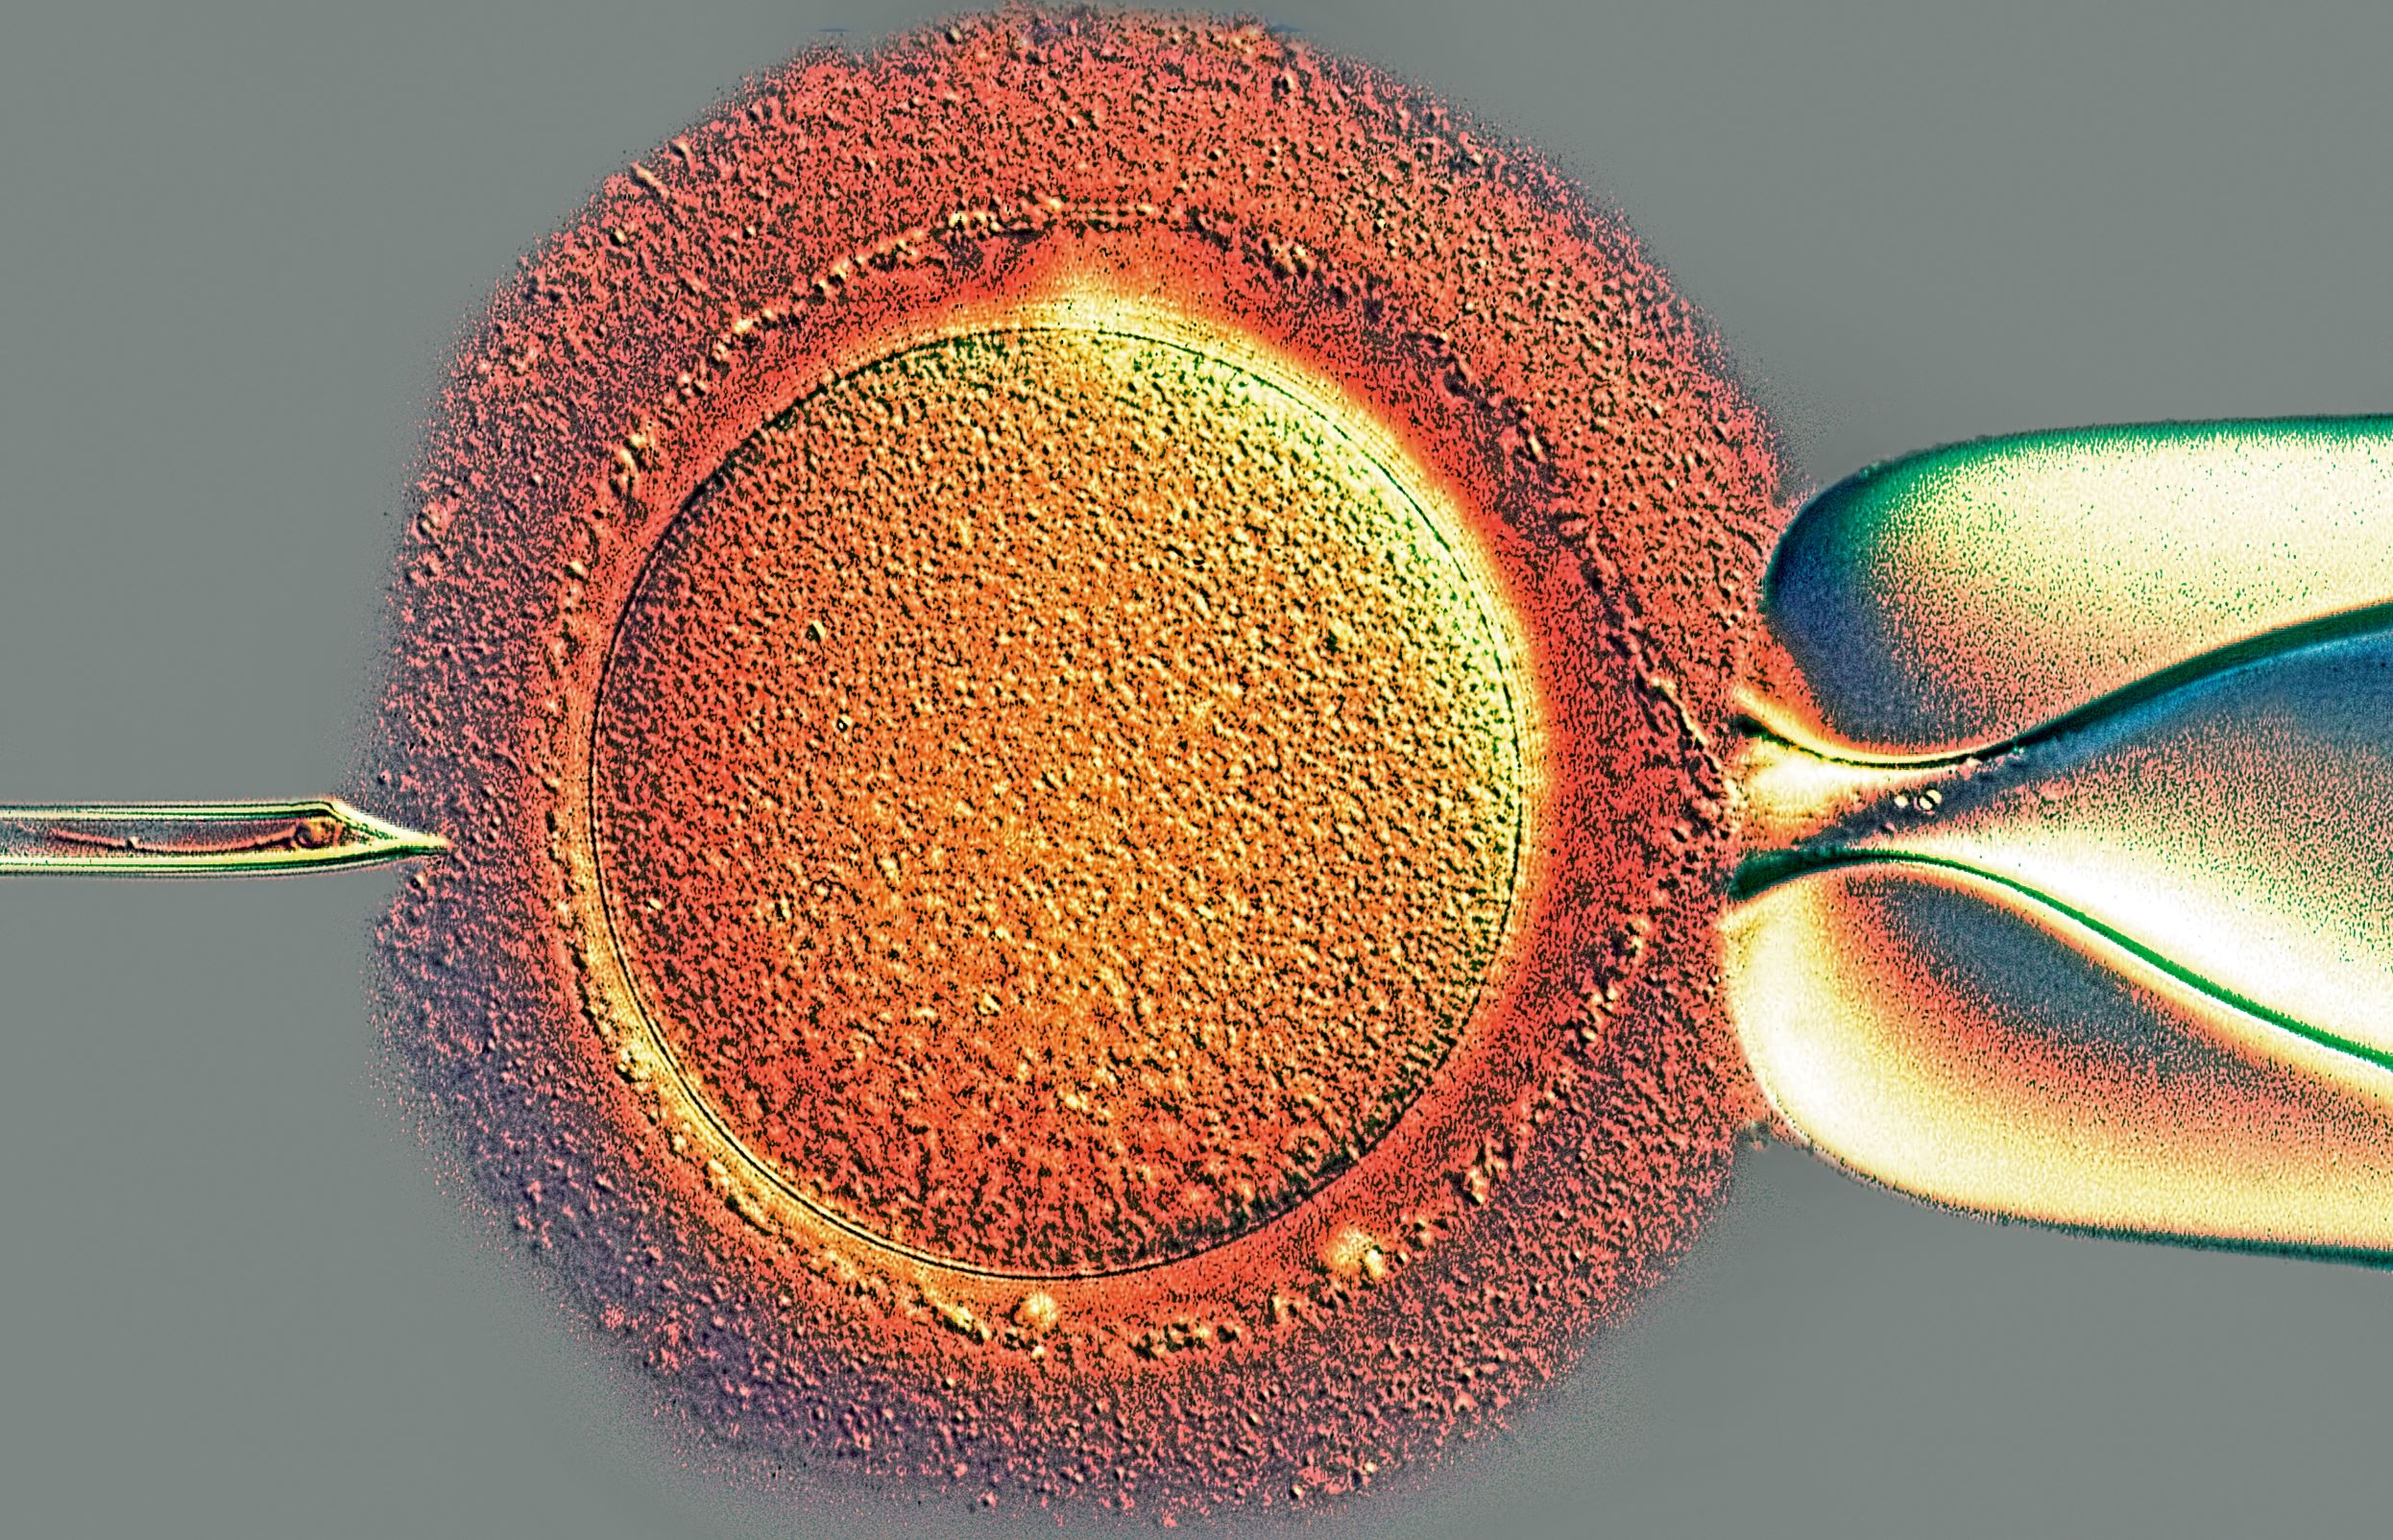 A single sperm being inserted into a prepared egg cell, c.2004, Spike Walker